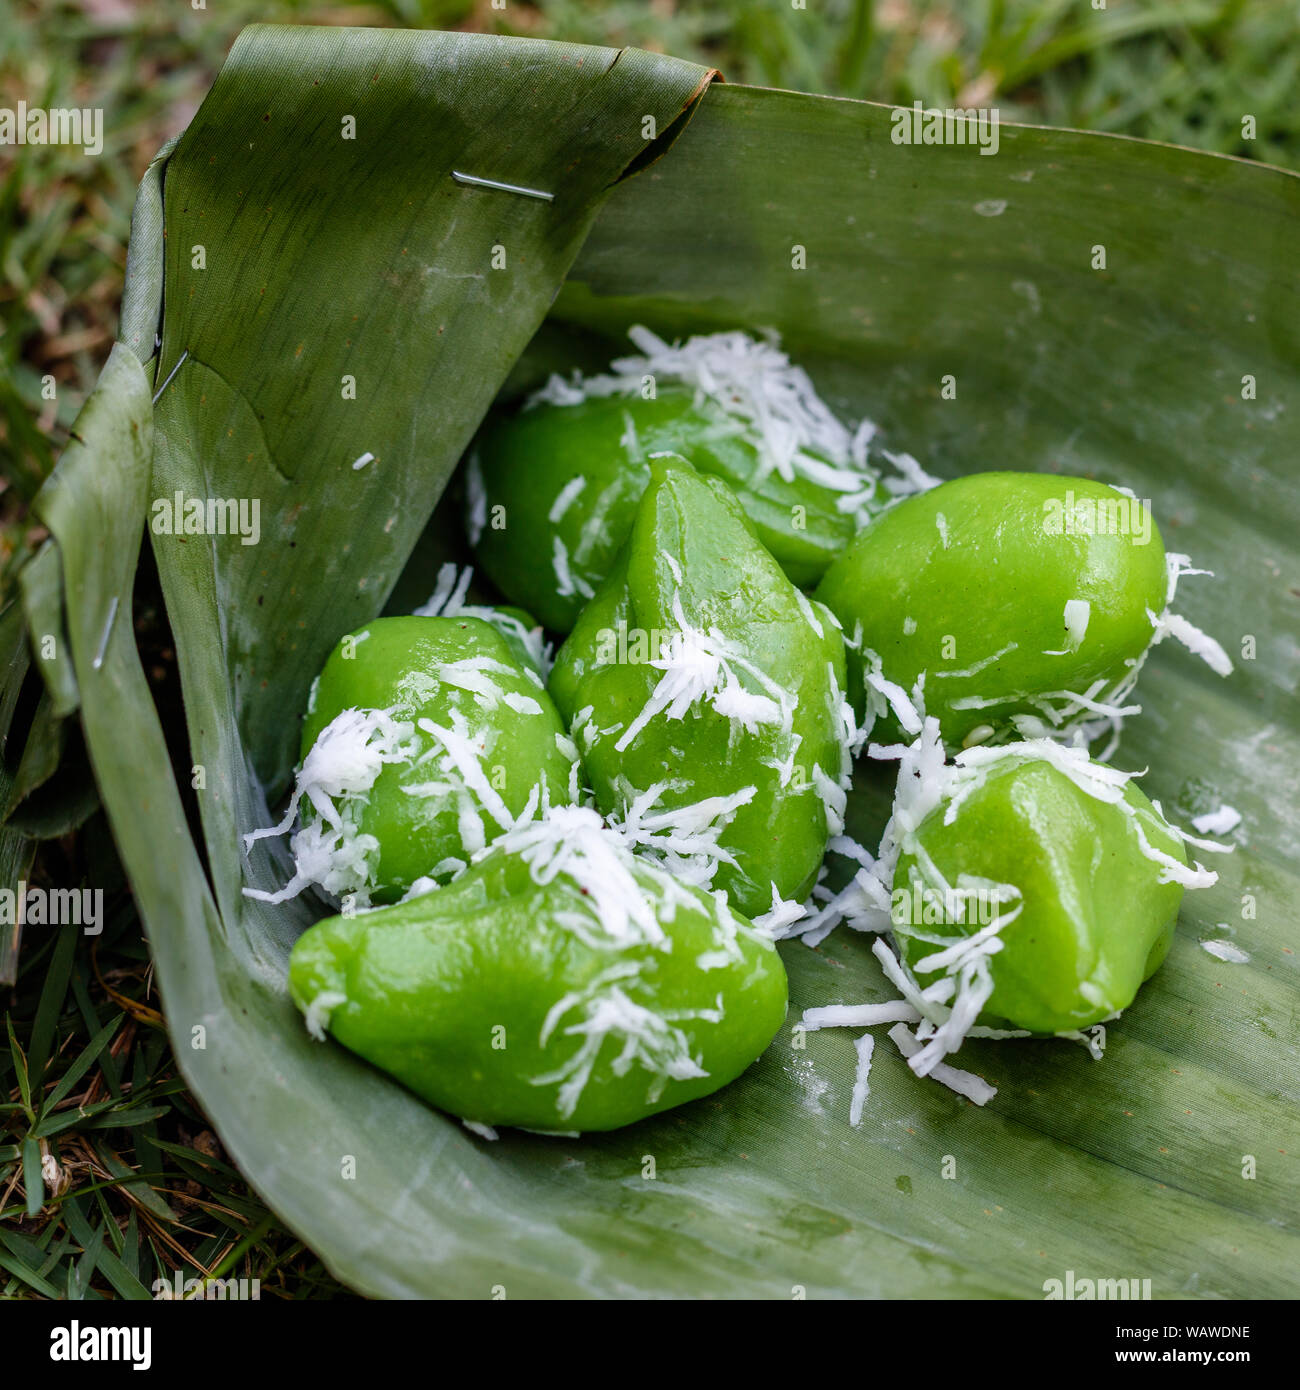 Klepon (kelepon) - sticky rice balls with caramelized coconut sugar in banana leaf, traditional Indonesian dessert, street food. Bali, Indonesia Stock Photo